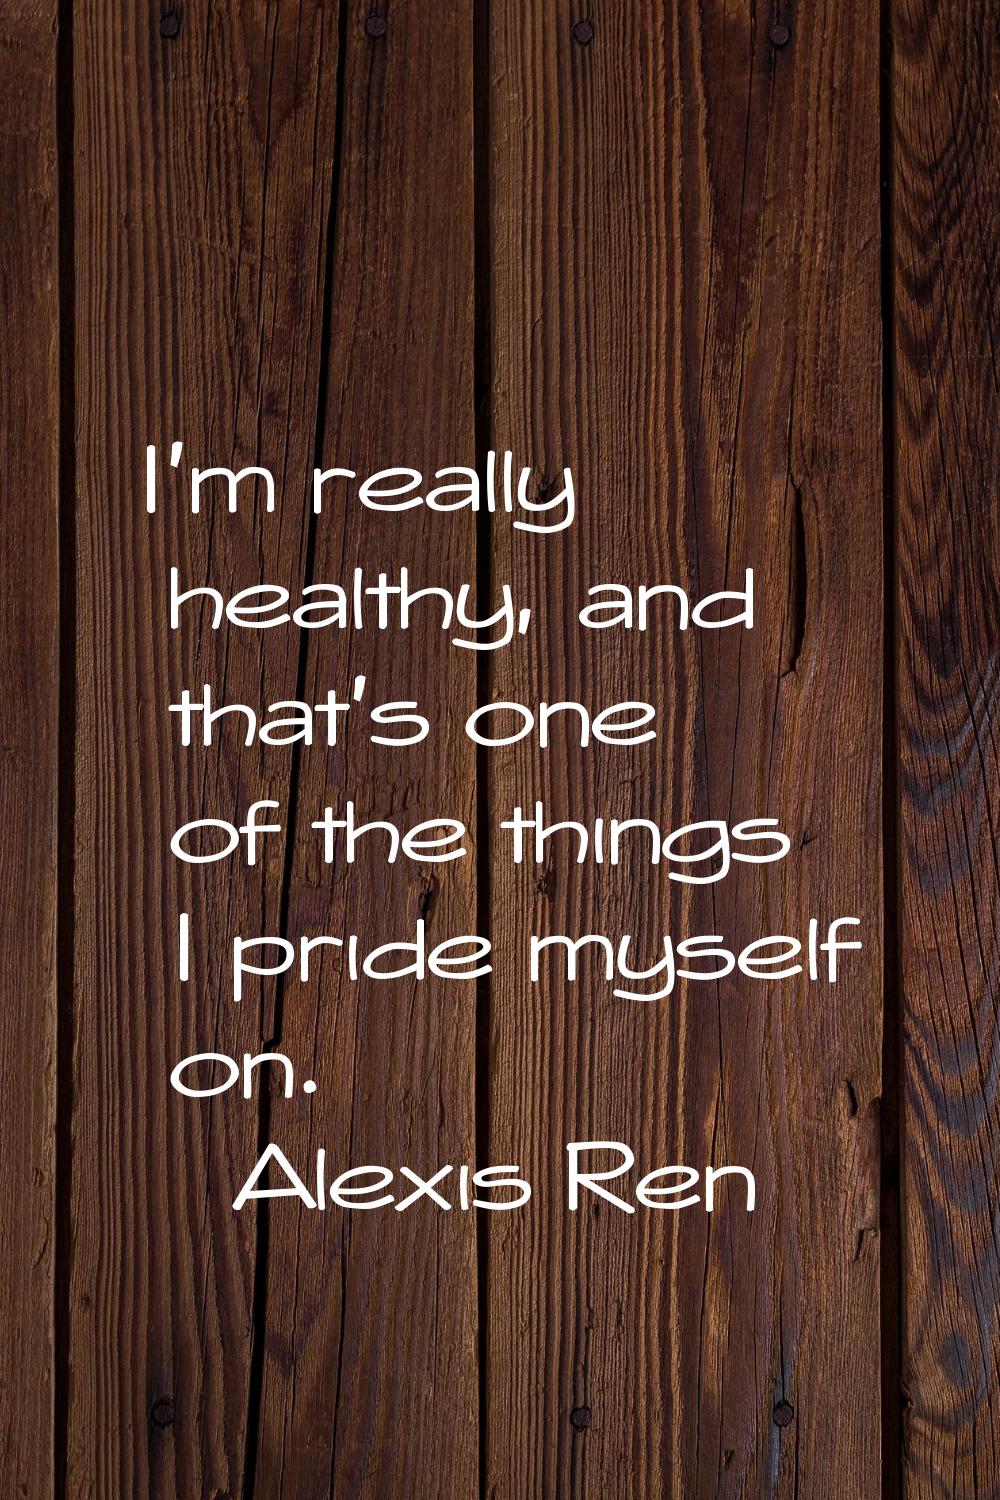 I'm really healthy, and that's one of the things I pride myself on.